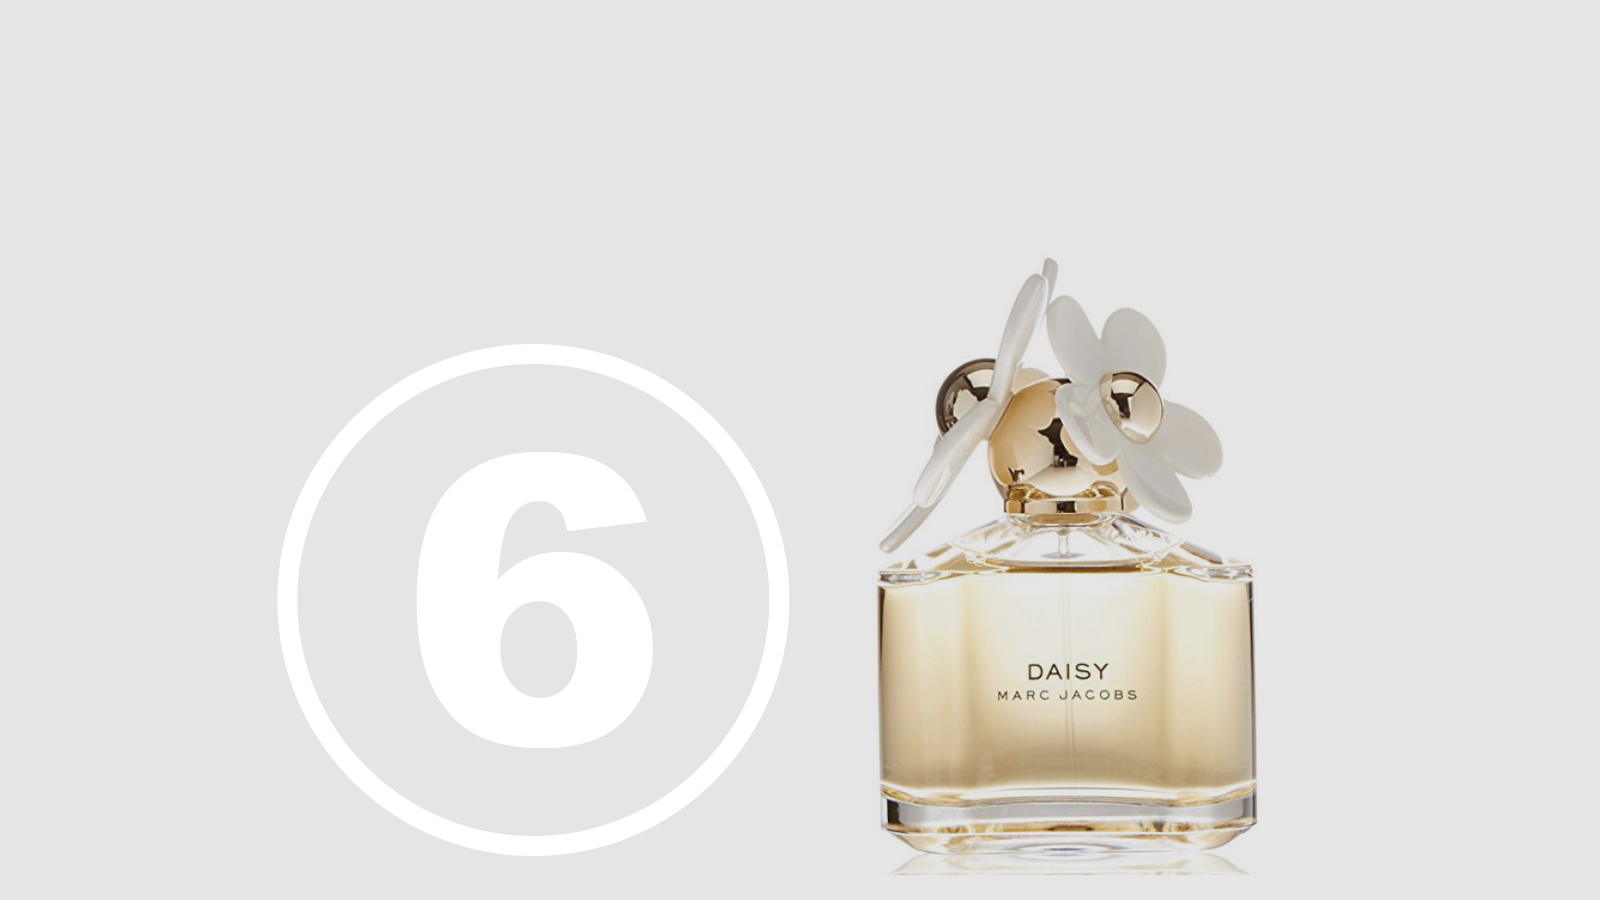 <h5>Top Ten Most Hazardous Products</h5><h4>Marc Jacobs Daisy Perfume</h4><p>Another Coty fragrance that carries the famous designer’s name and uses beatific, radiant young girls in its marketing campaigns.<br />We found <span class=